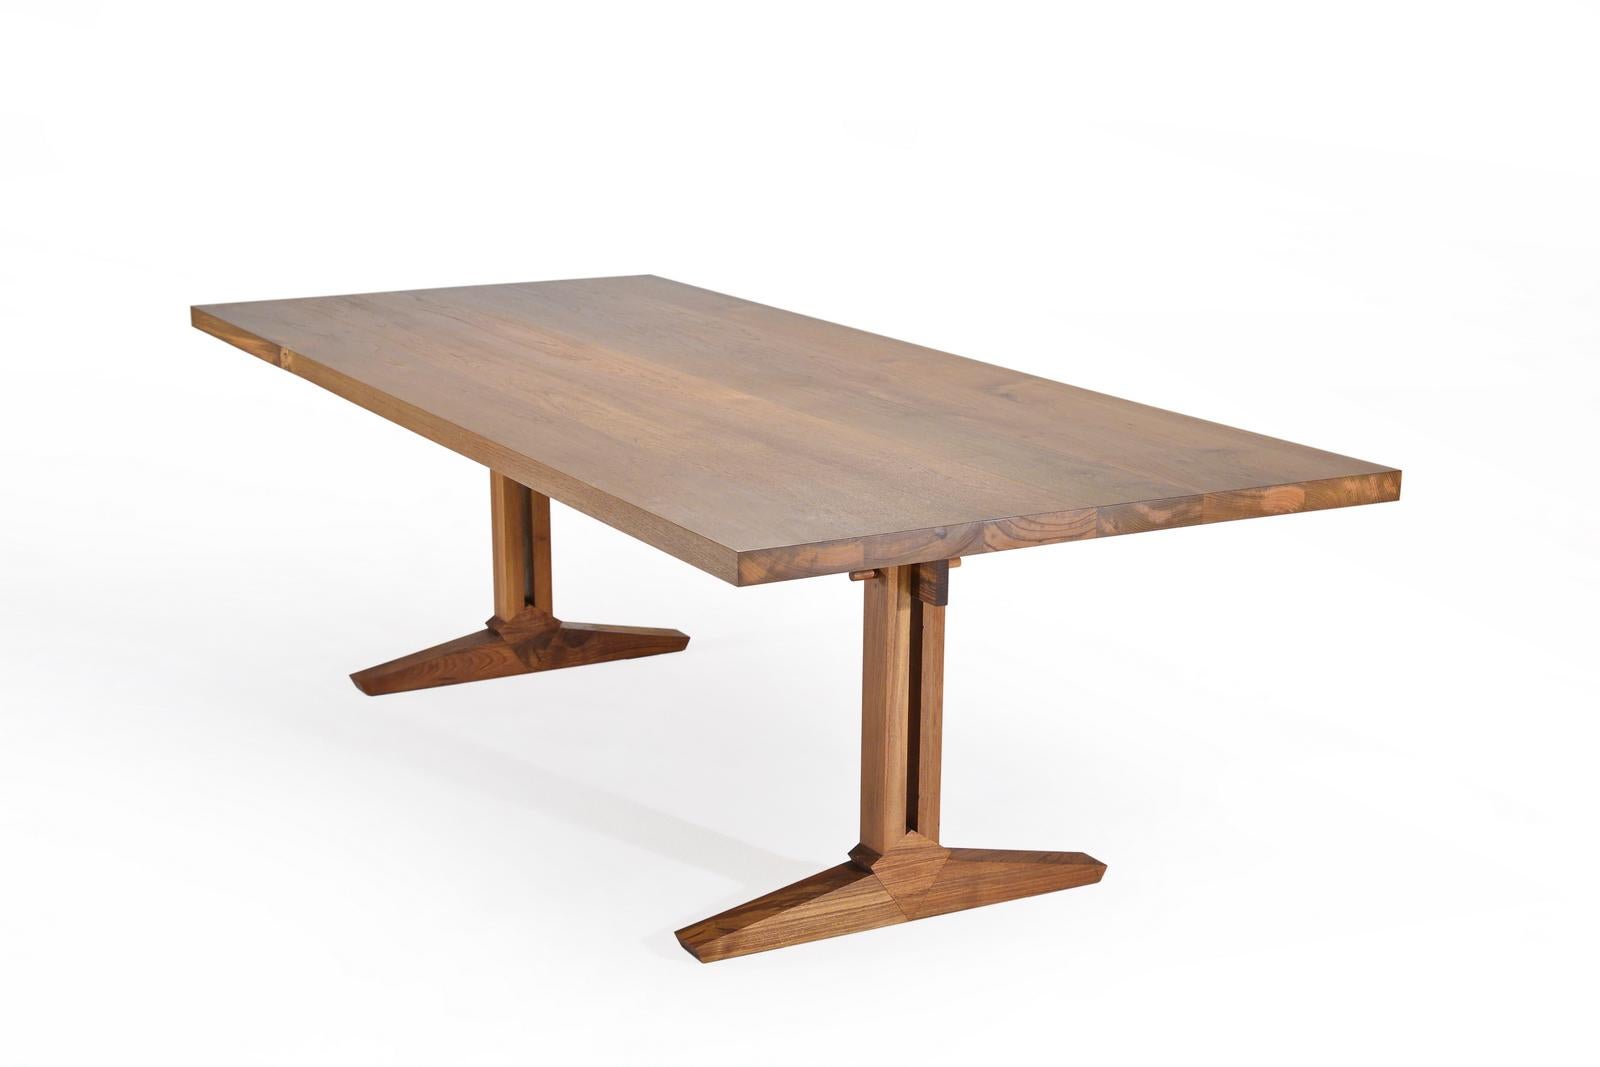 This is our very first 100% in-house designed and created table, or desk, or console. While we are known for mounting our creations on sand cast bronze or brass bases, we do not want to limit ourselves. We went back to the basics on this one: pure